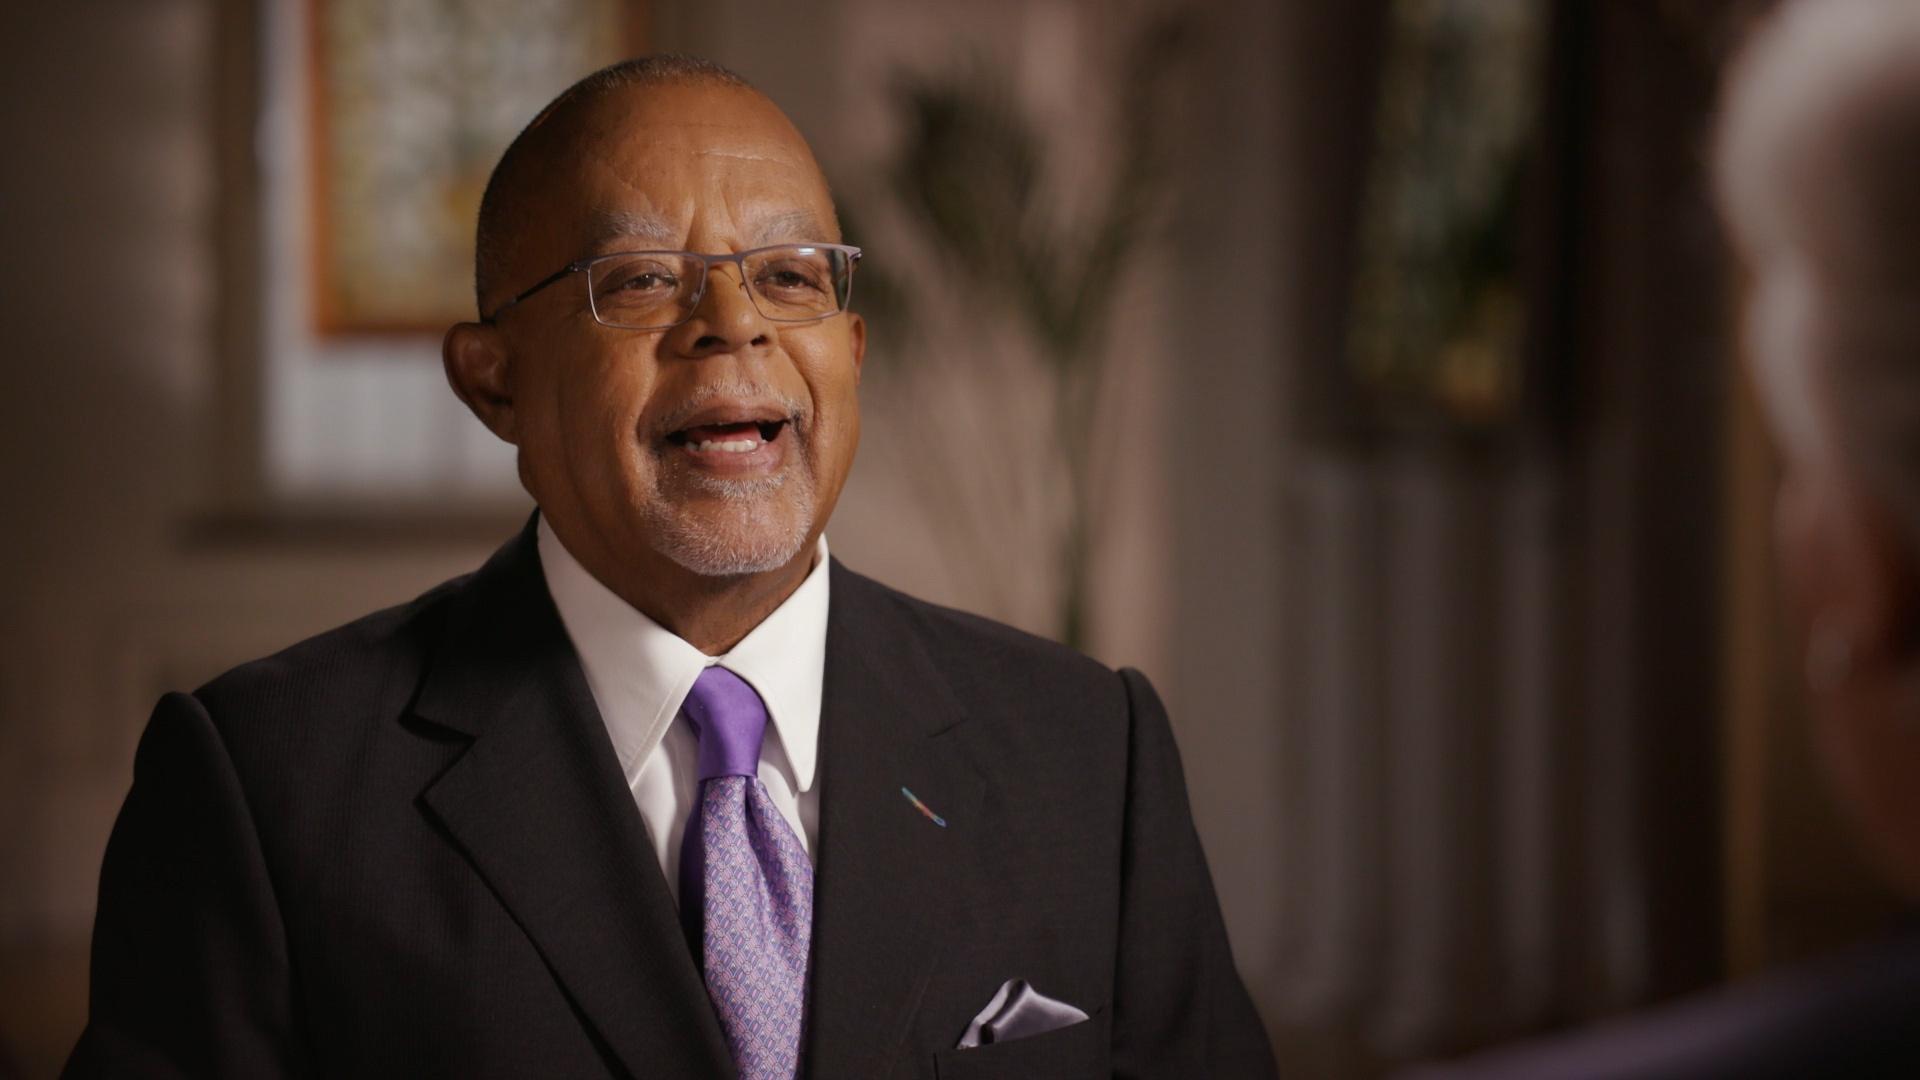 New Finding Your Roots Episodes Return This Fall Finding Your Roots